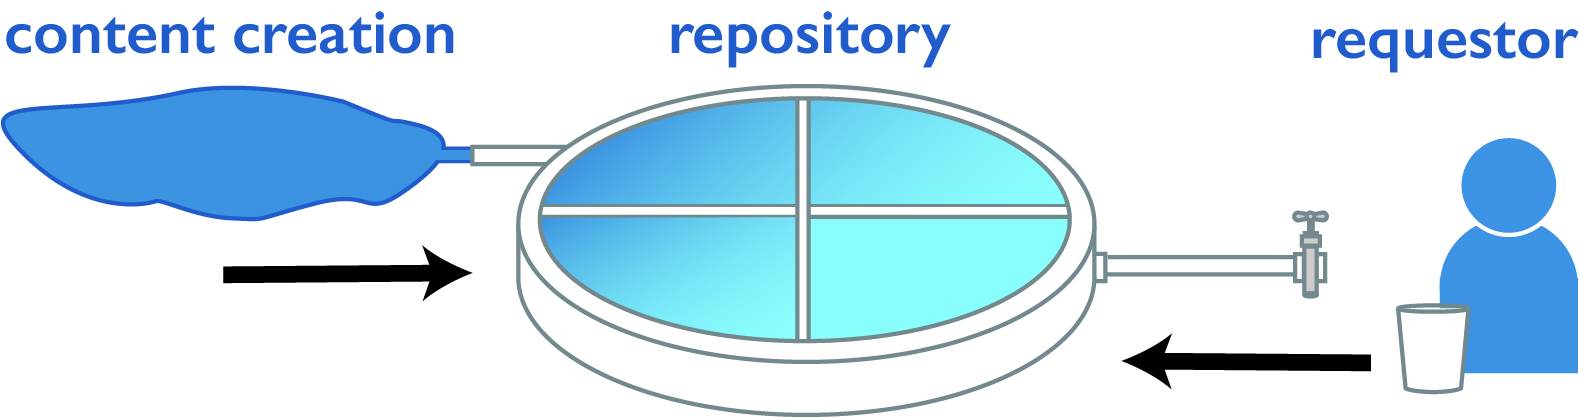 A graphic showing the requestor getting water from a tap. The water represents content creation and the tap represent the repository.